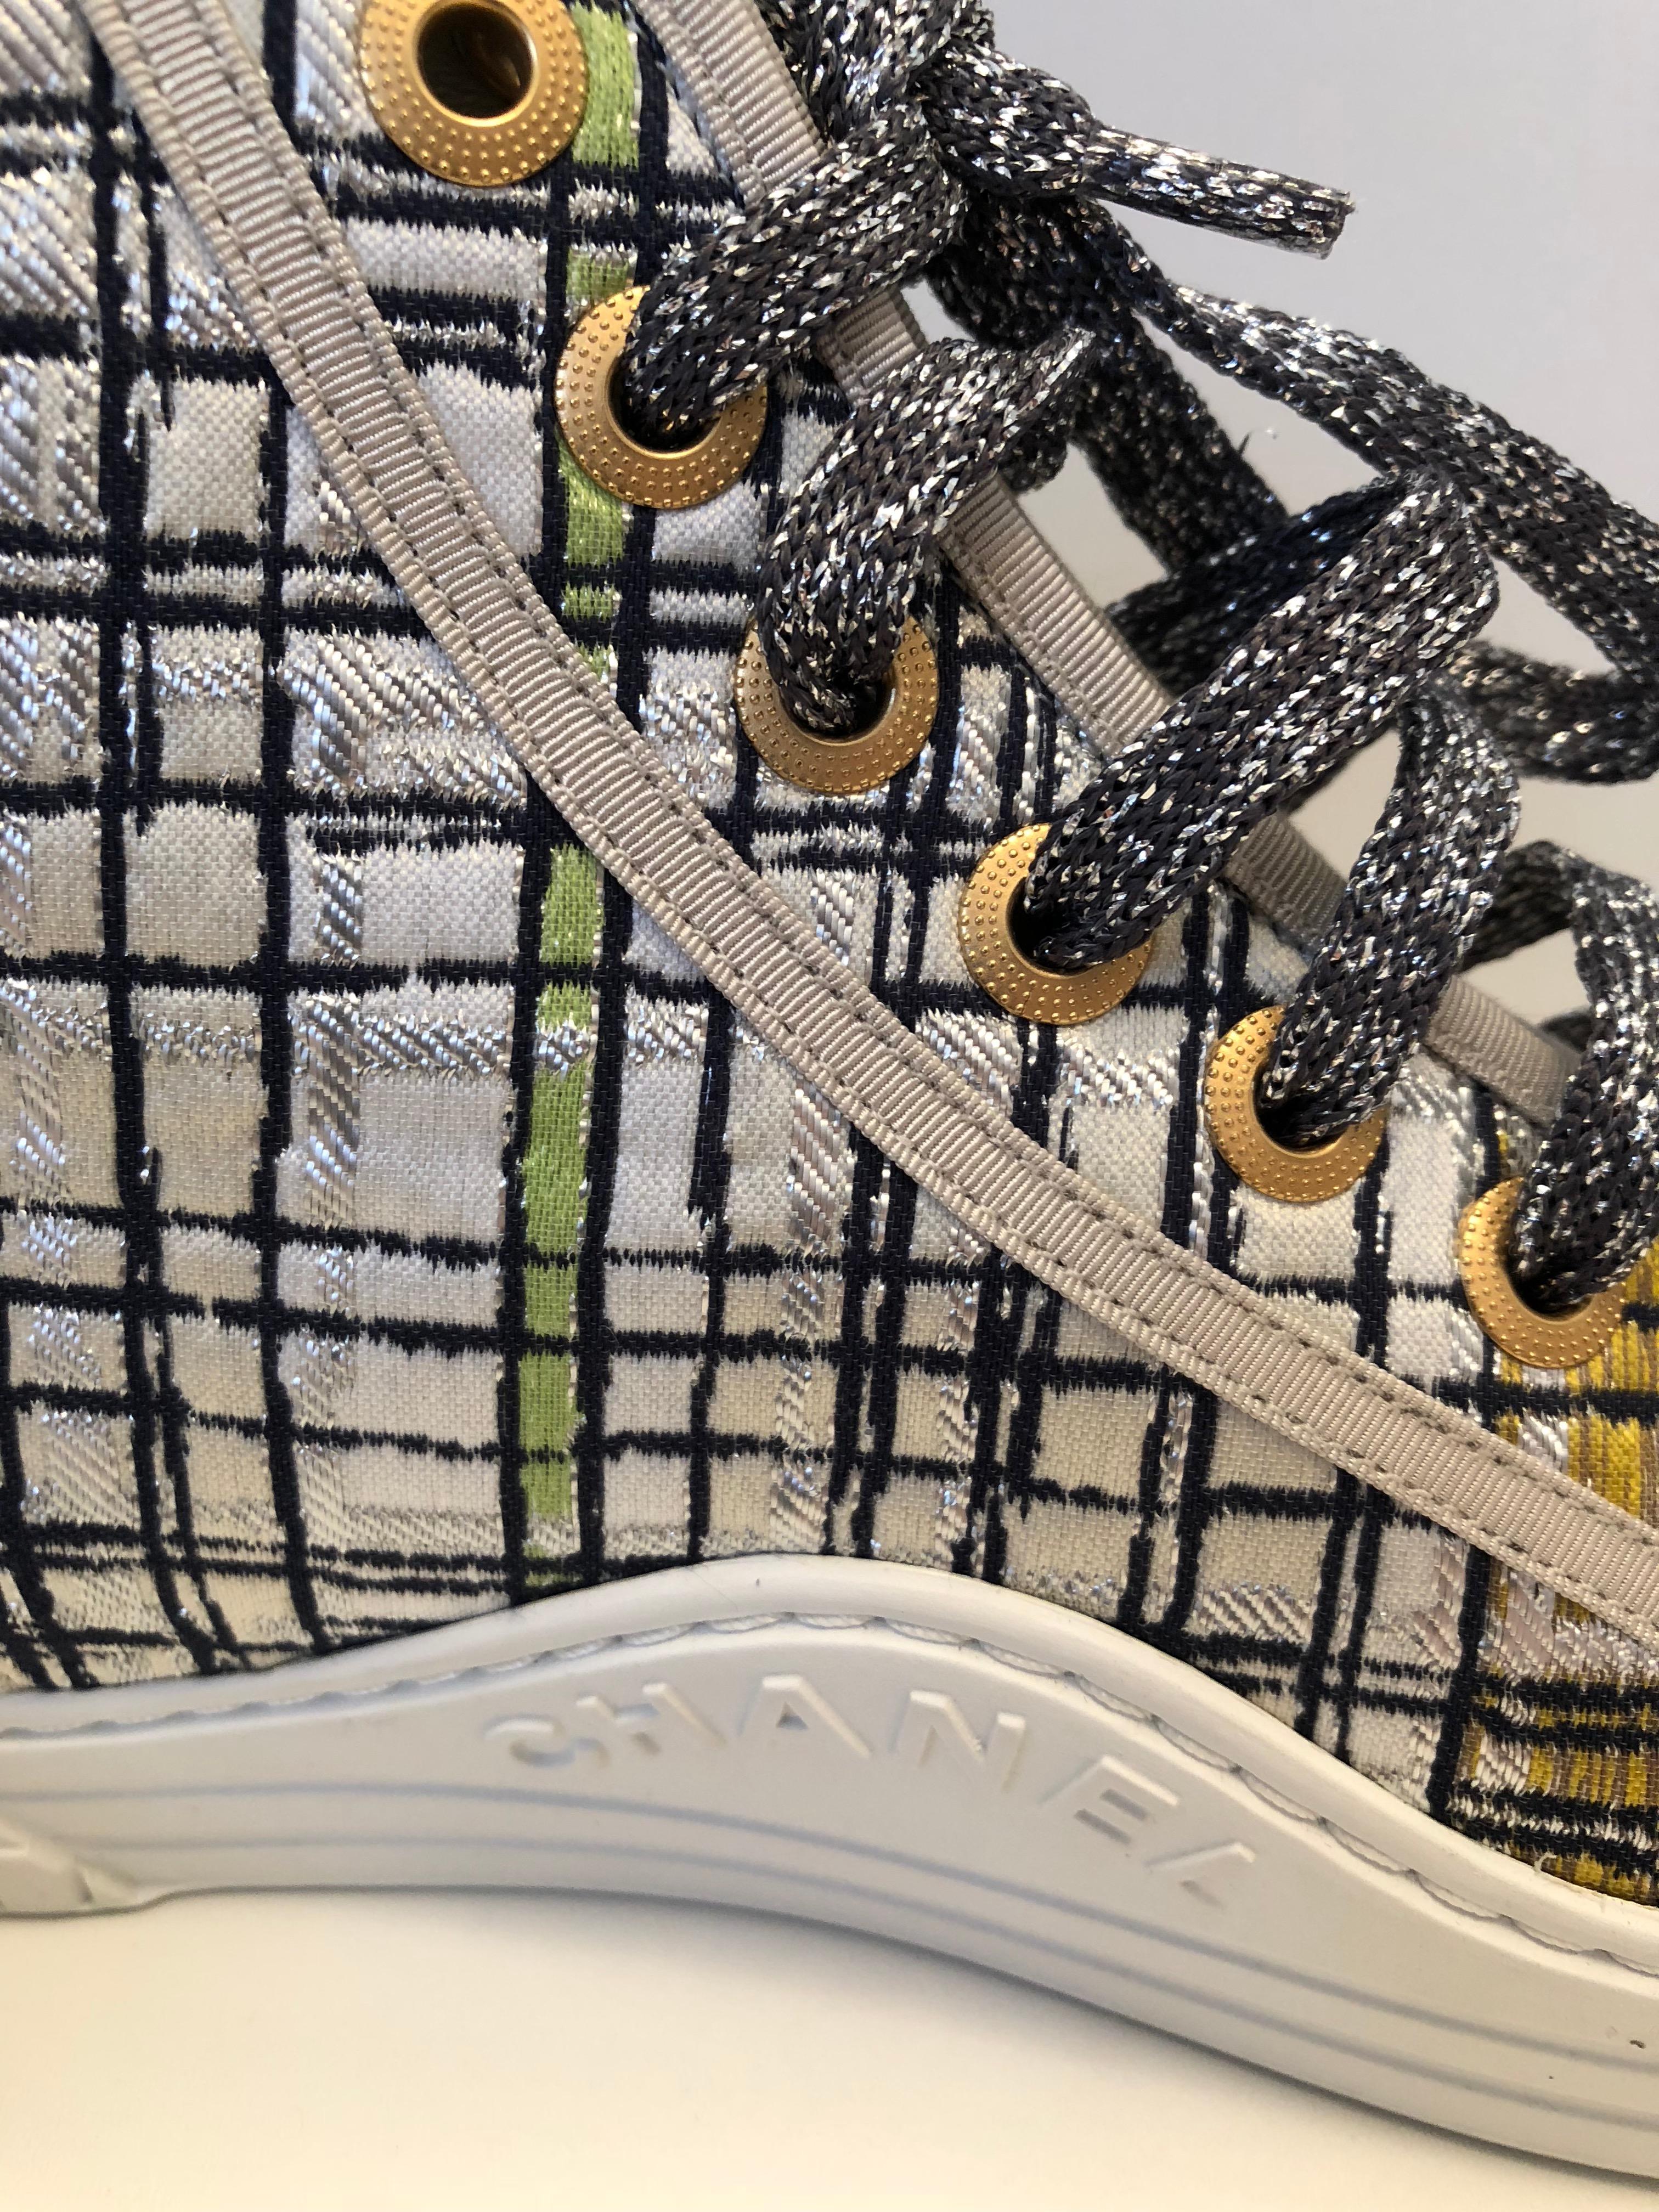 gold and silver chanel sneakers